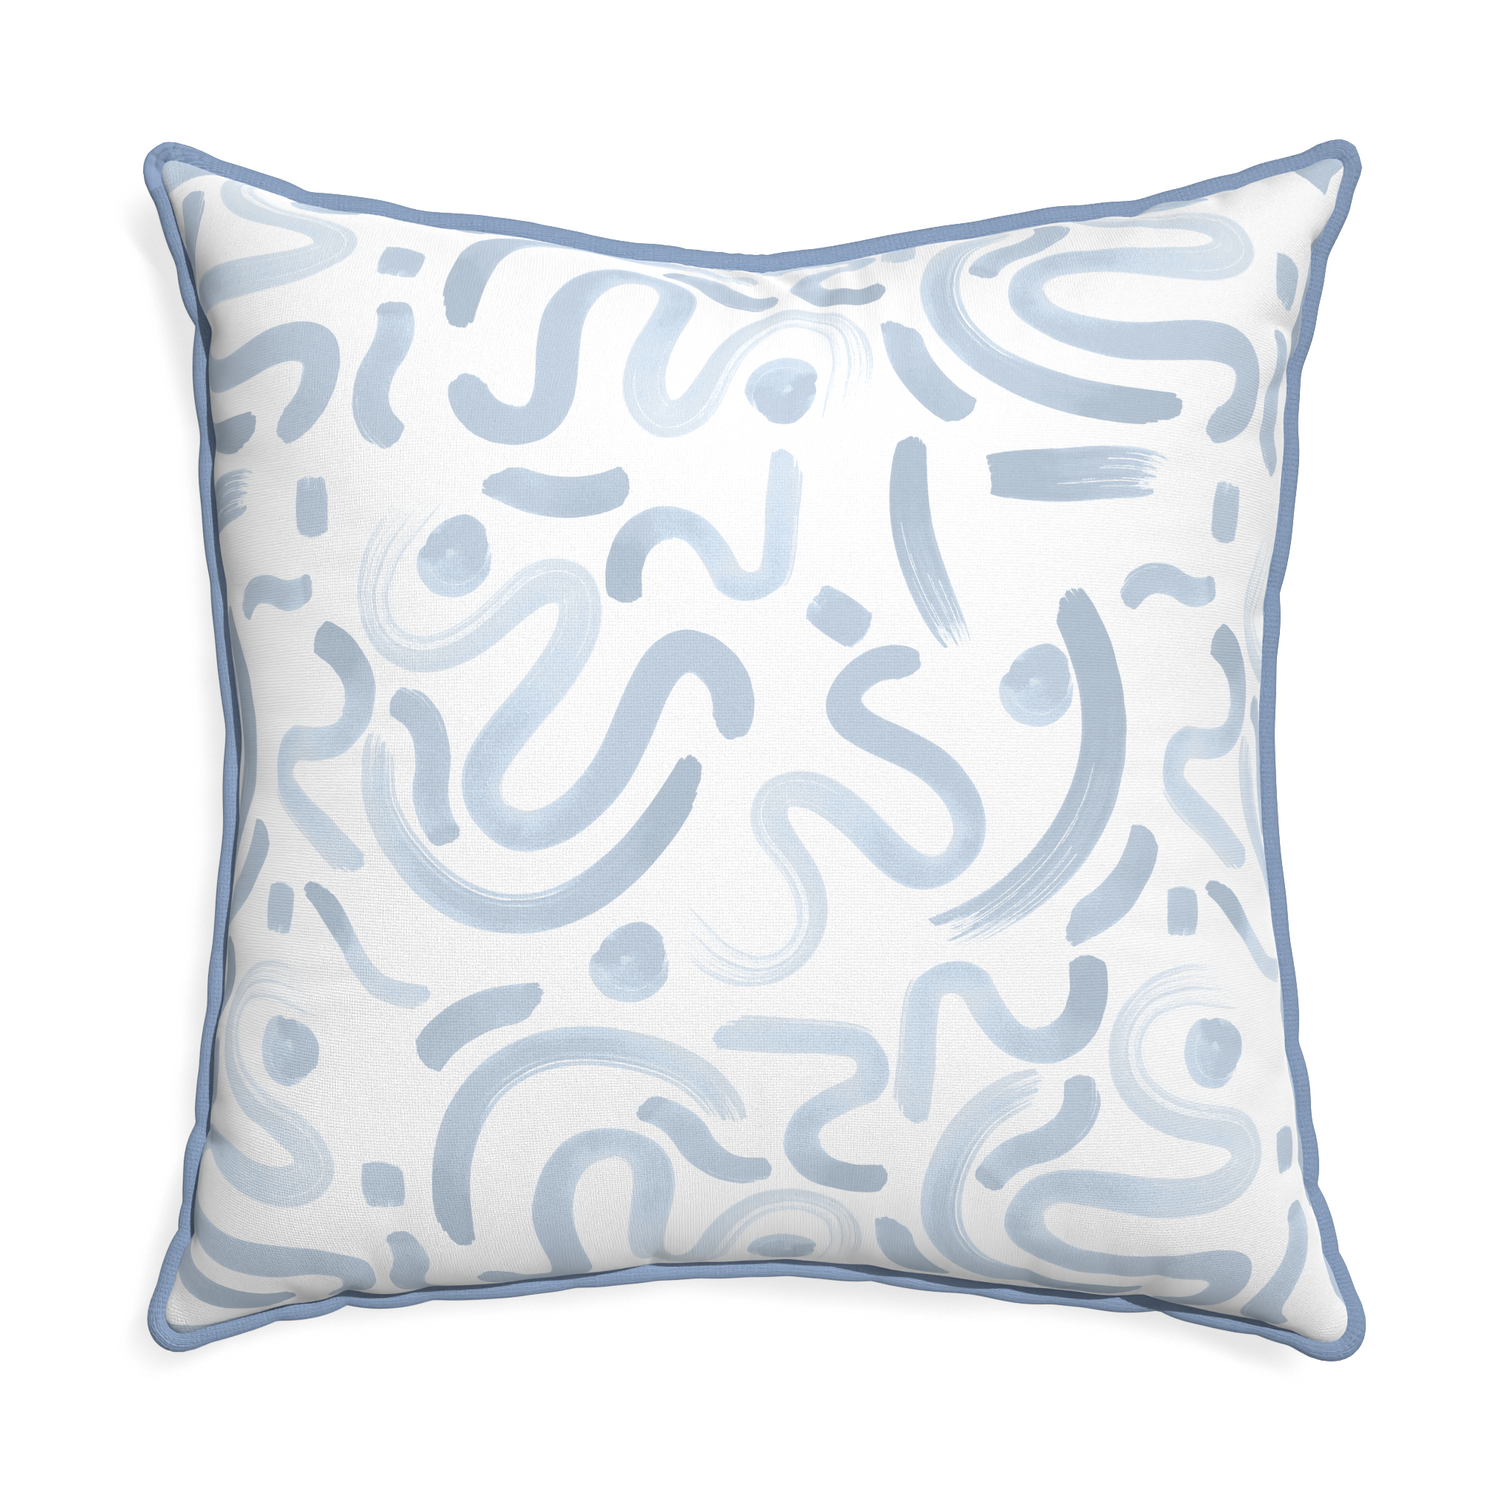 Euro-sham hockney sky custom pillow with sky piping on white background